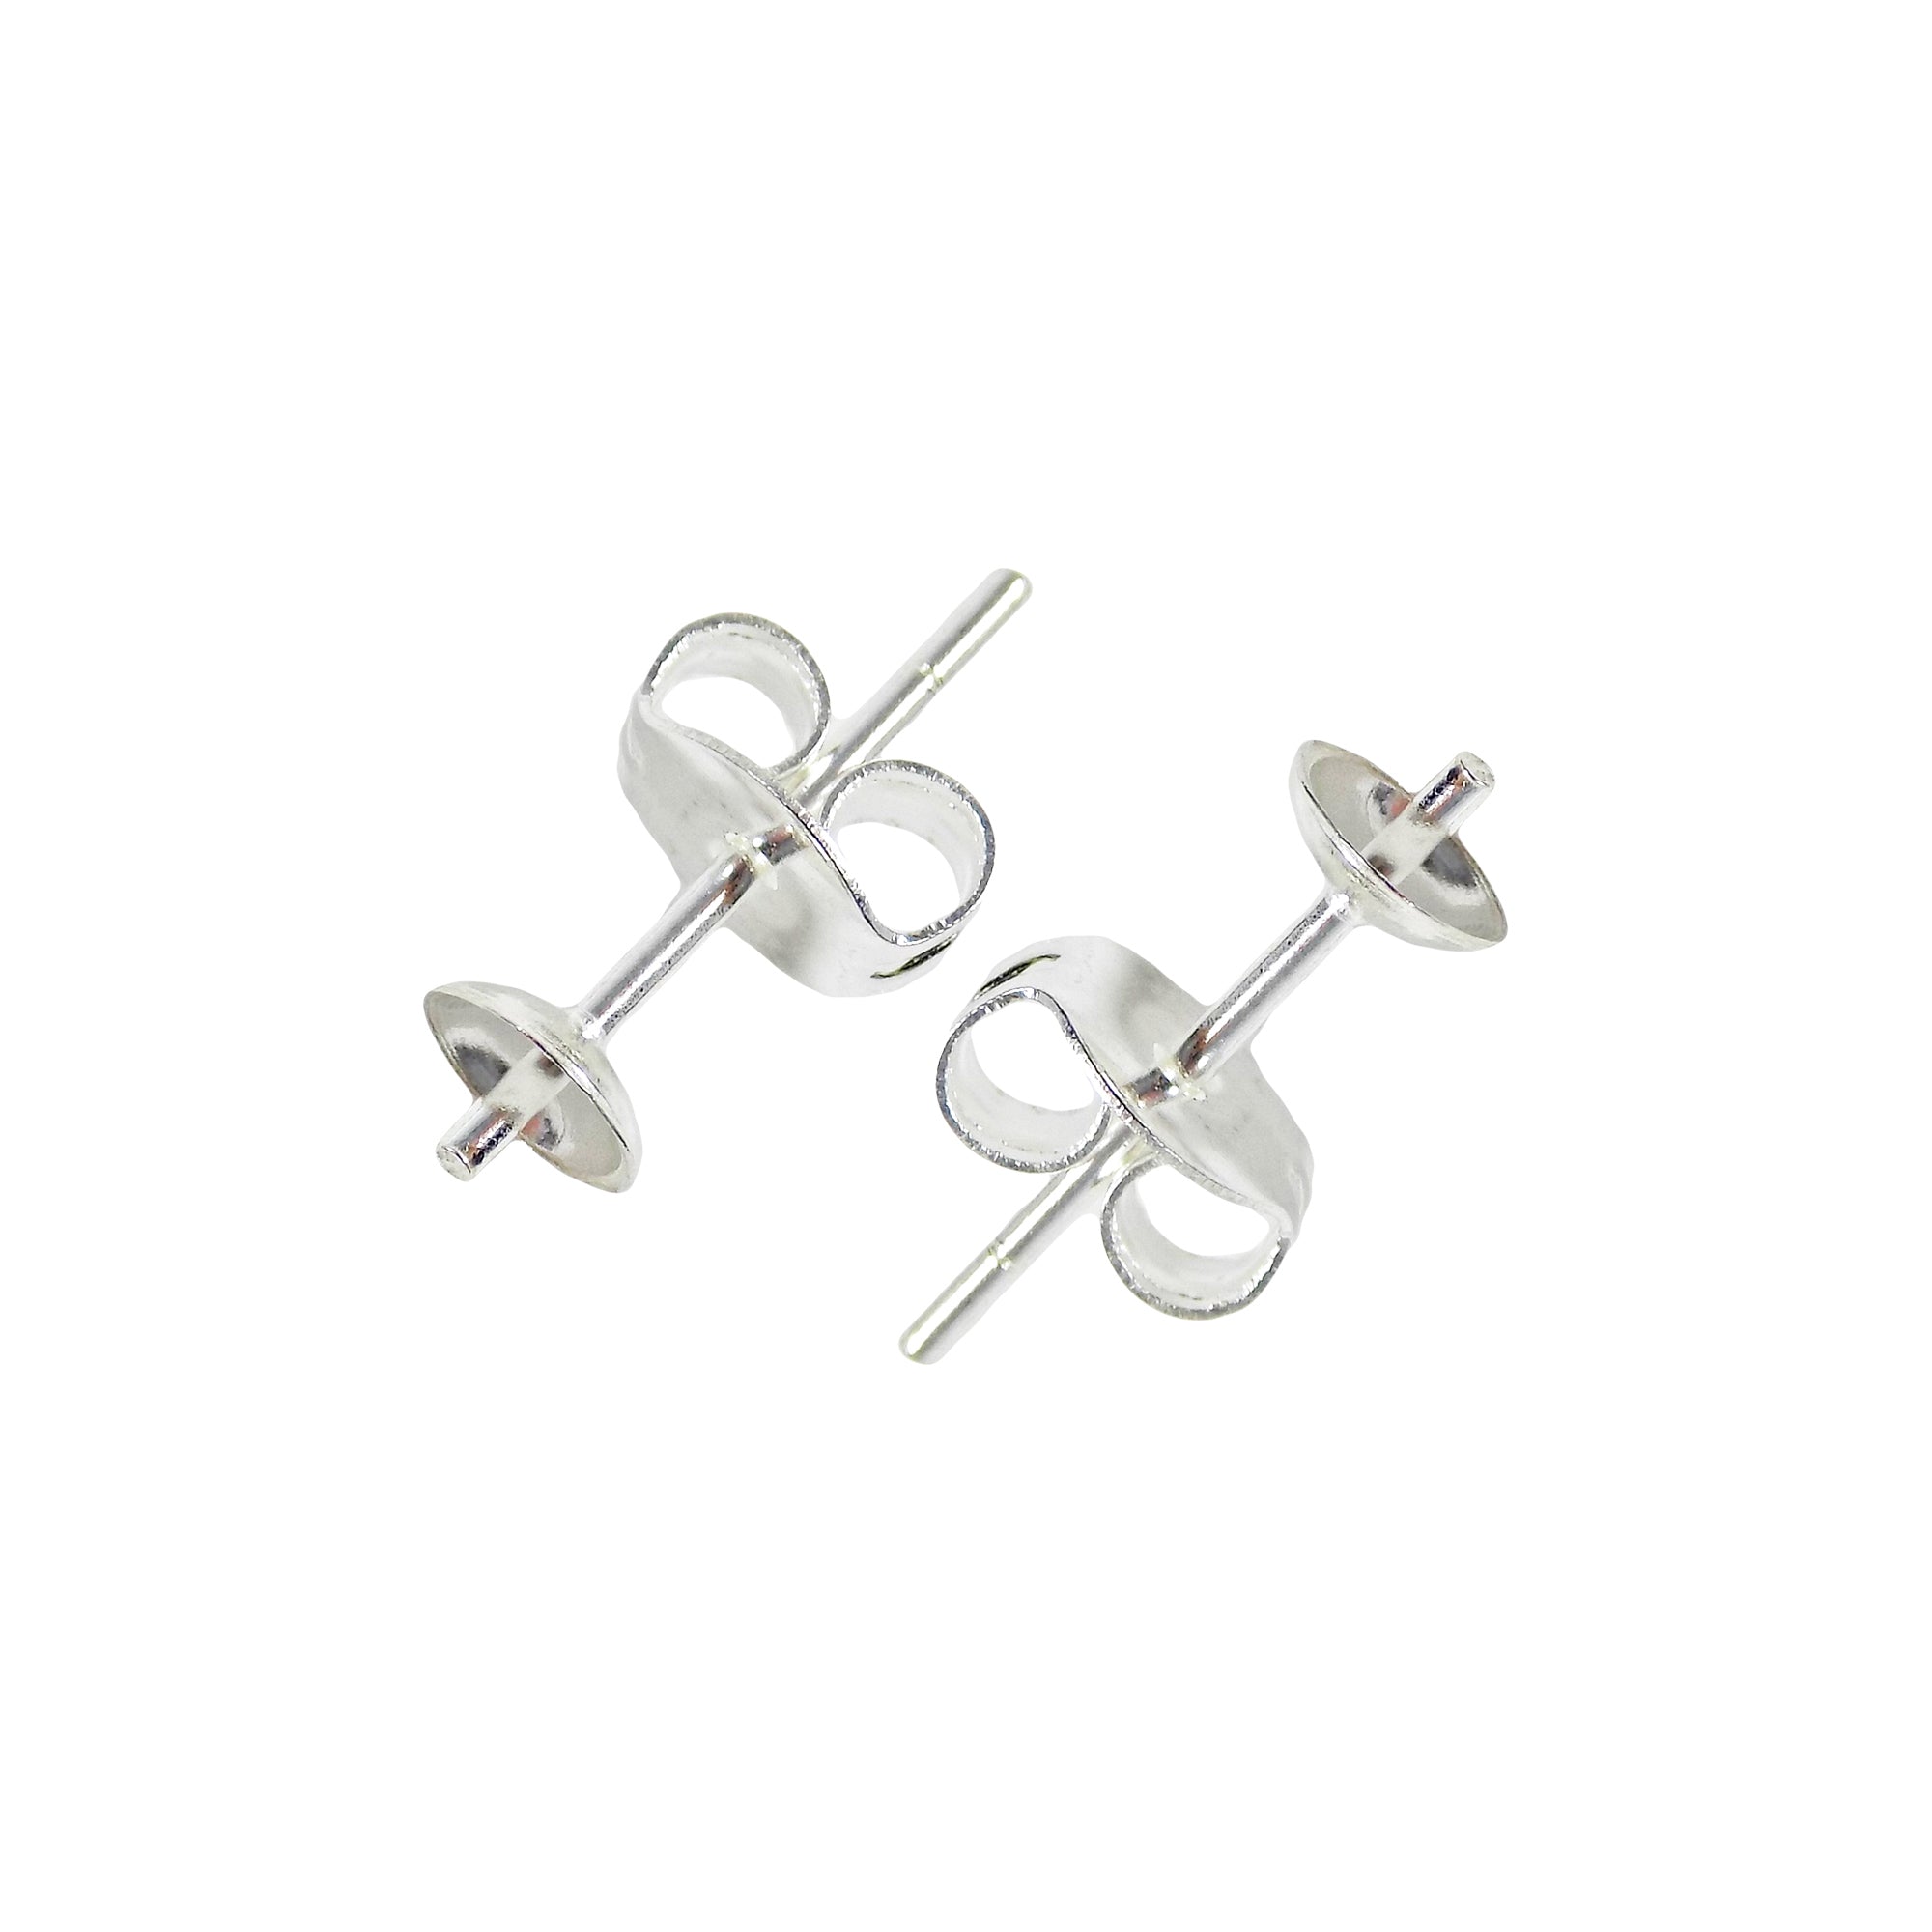 silver earring posts. Earring Posts Pearl Cup and Ear-Back 925 Sterling Silver